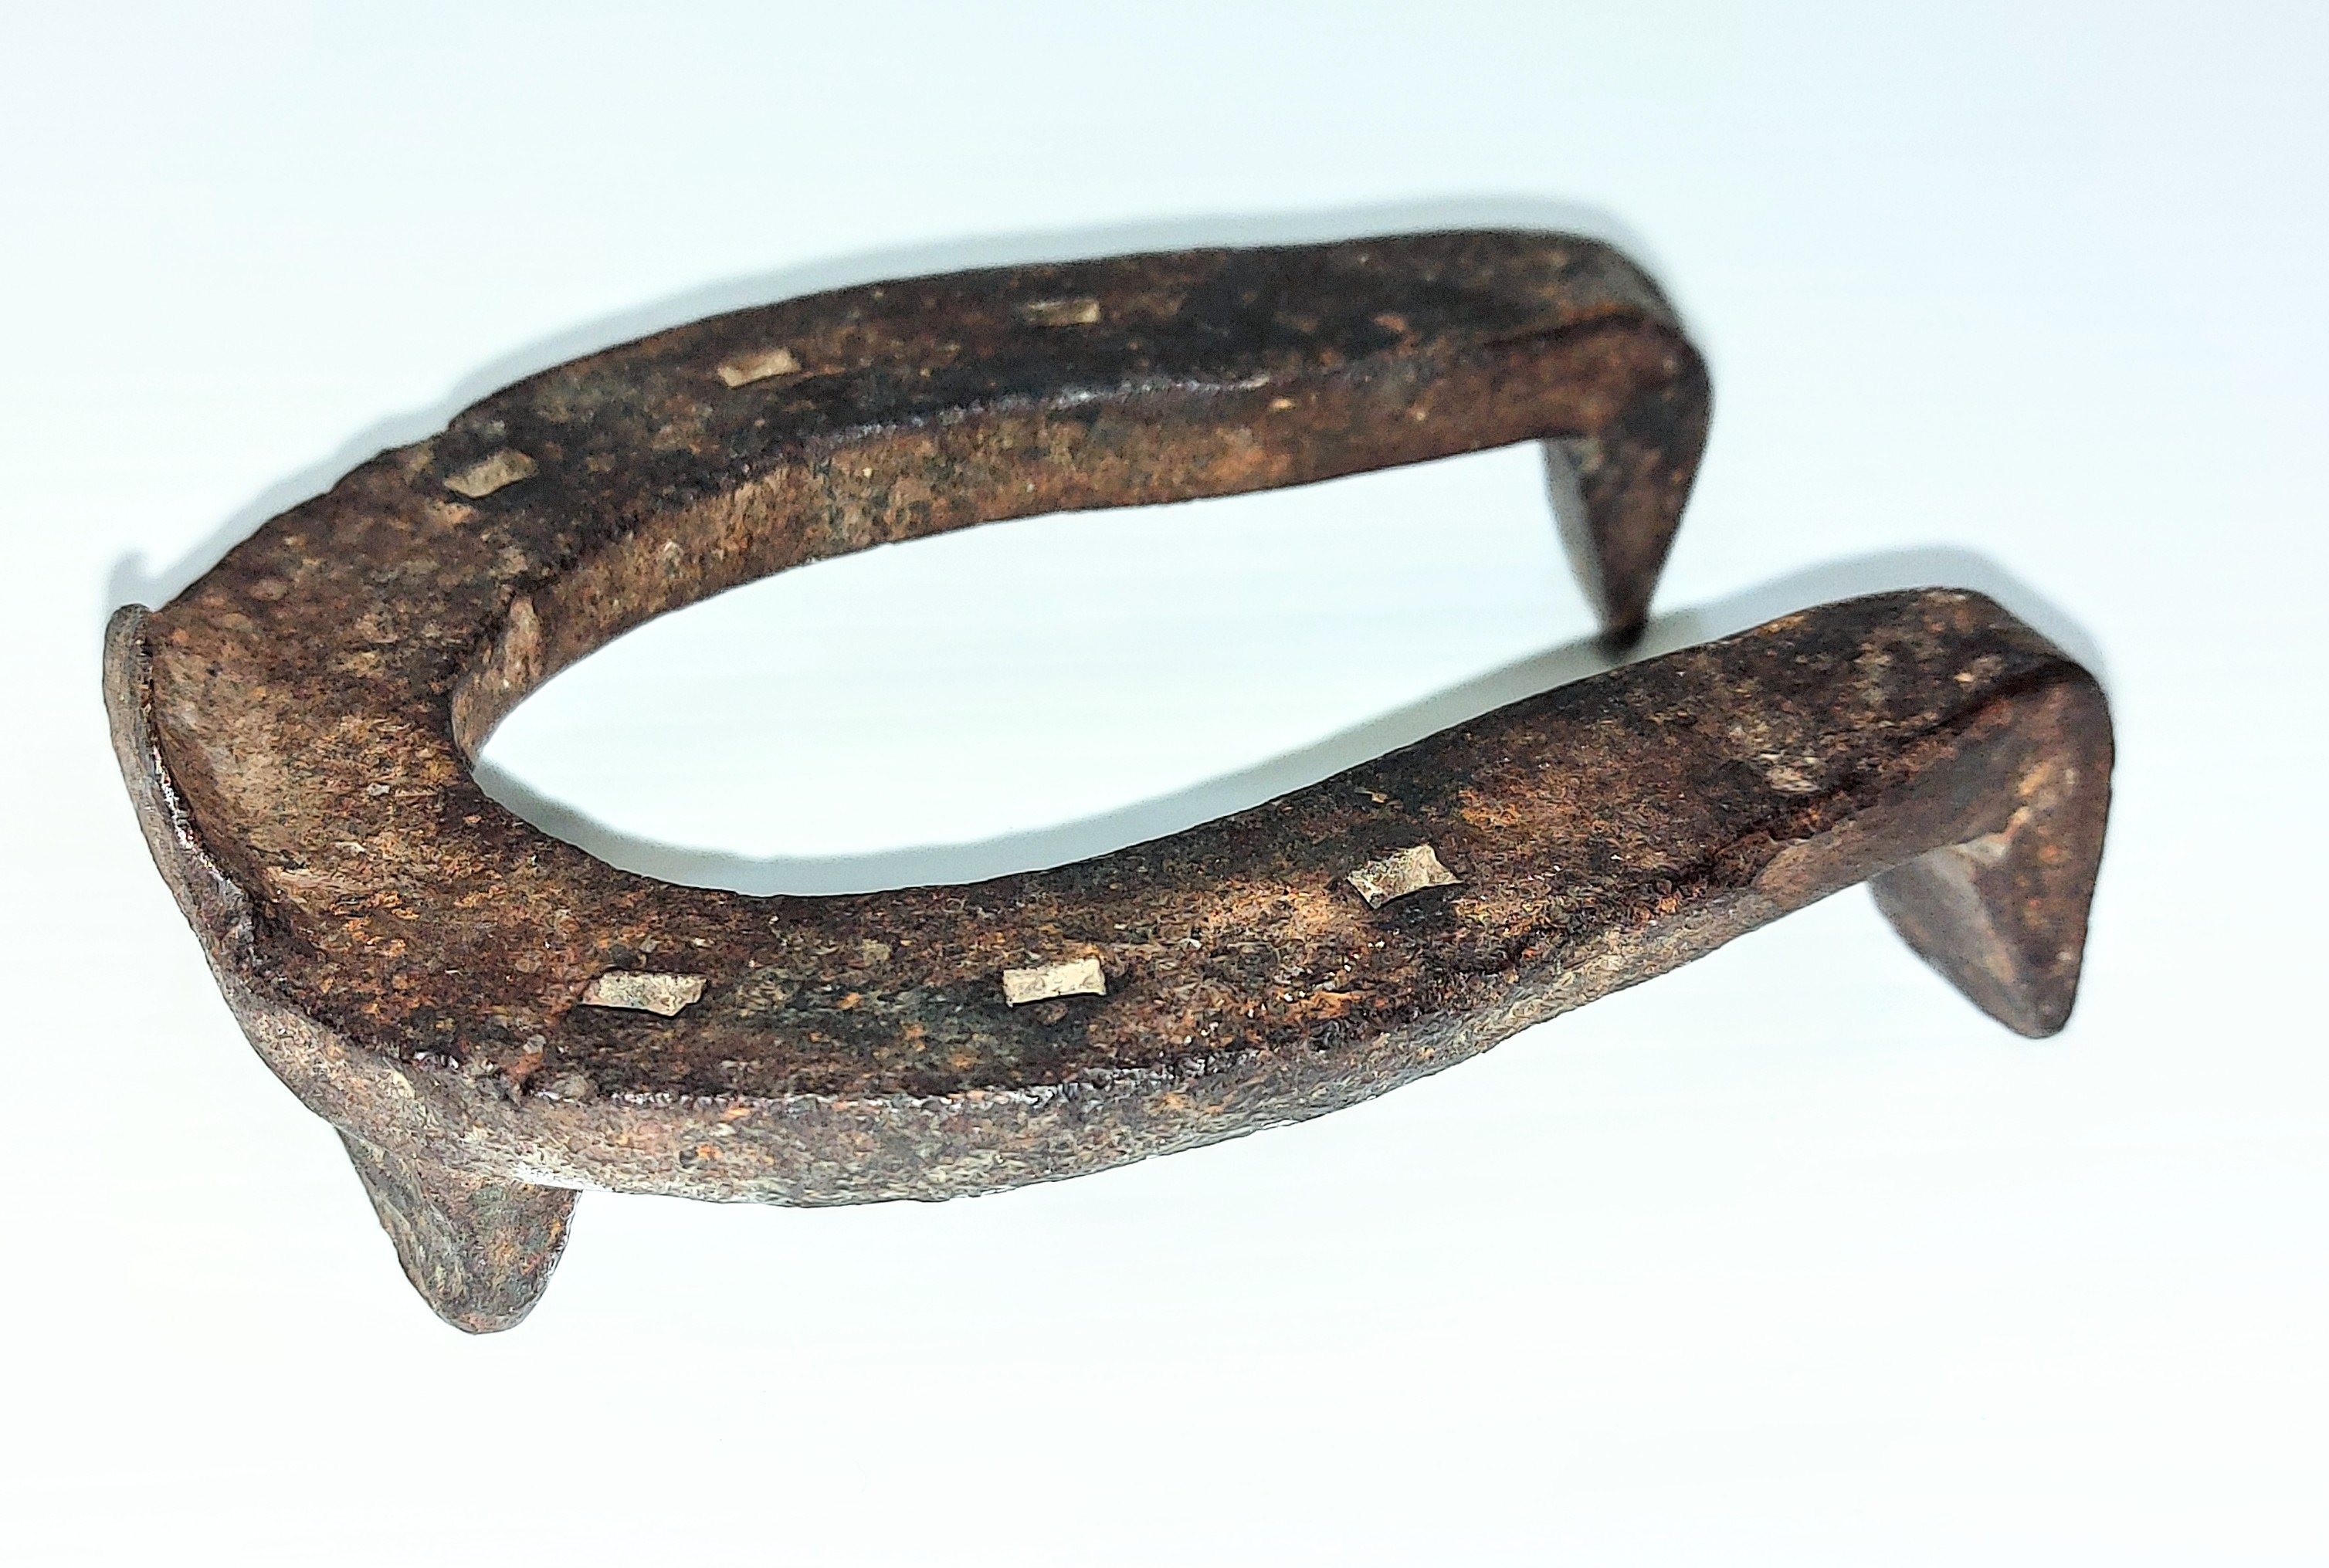 This is a small (it's only 10cm X 7cm) ice or "pulling" horseshoe. The shape is the same as regular horseshoes but also has 3 large spikes - one on the front near the toe and two on the back. These spikes provide extra traction in icy conditions or when pulling heavy loads. Horses used by Louis Bourassa on the mail route, or those used by Jack Whitehouse or Frank Flett in hauling water throughout the community likely would have used such a shoe in the winter season. Horses were also used to move buildings in the community and may have been shod with such a shoe.
2007.61.17 / Tourangeau Martha + Harvey